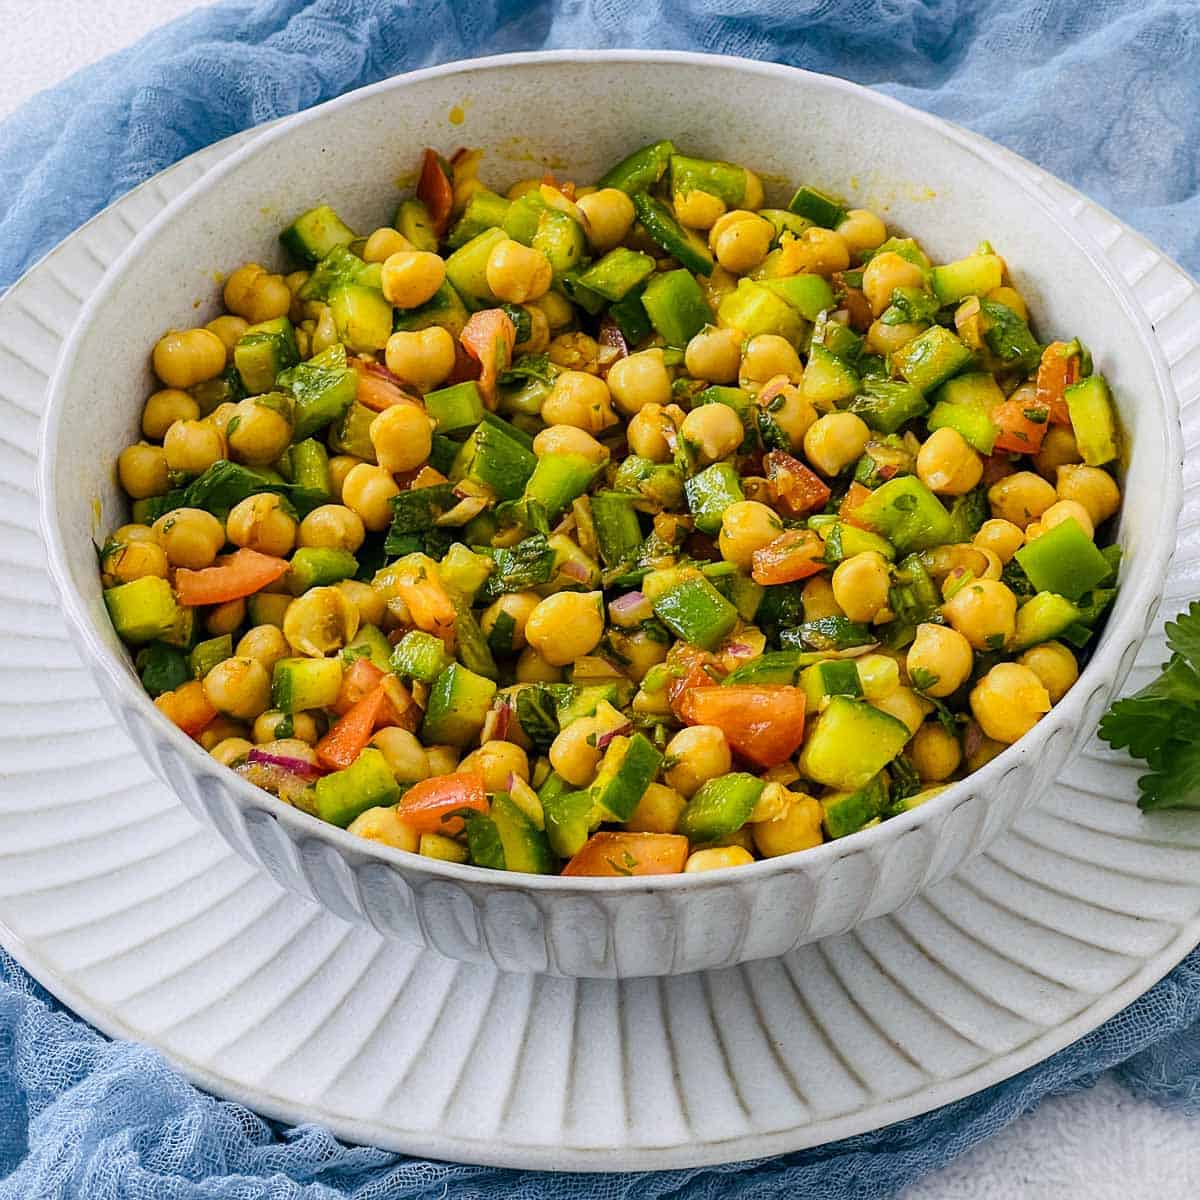 Moroccan chickpea salad garnished with cilantro and mint.